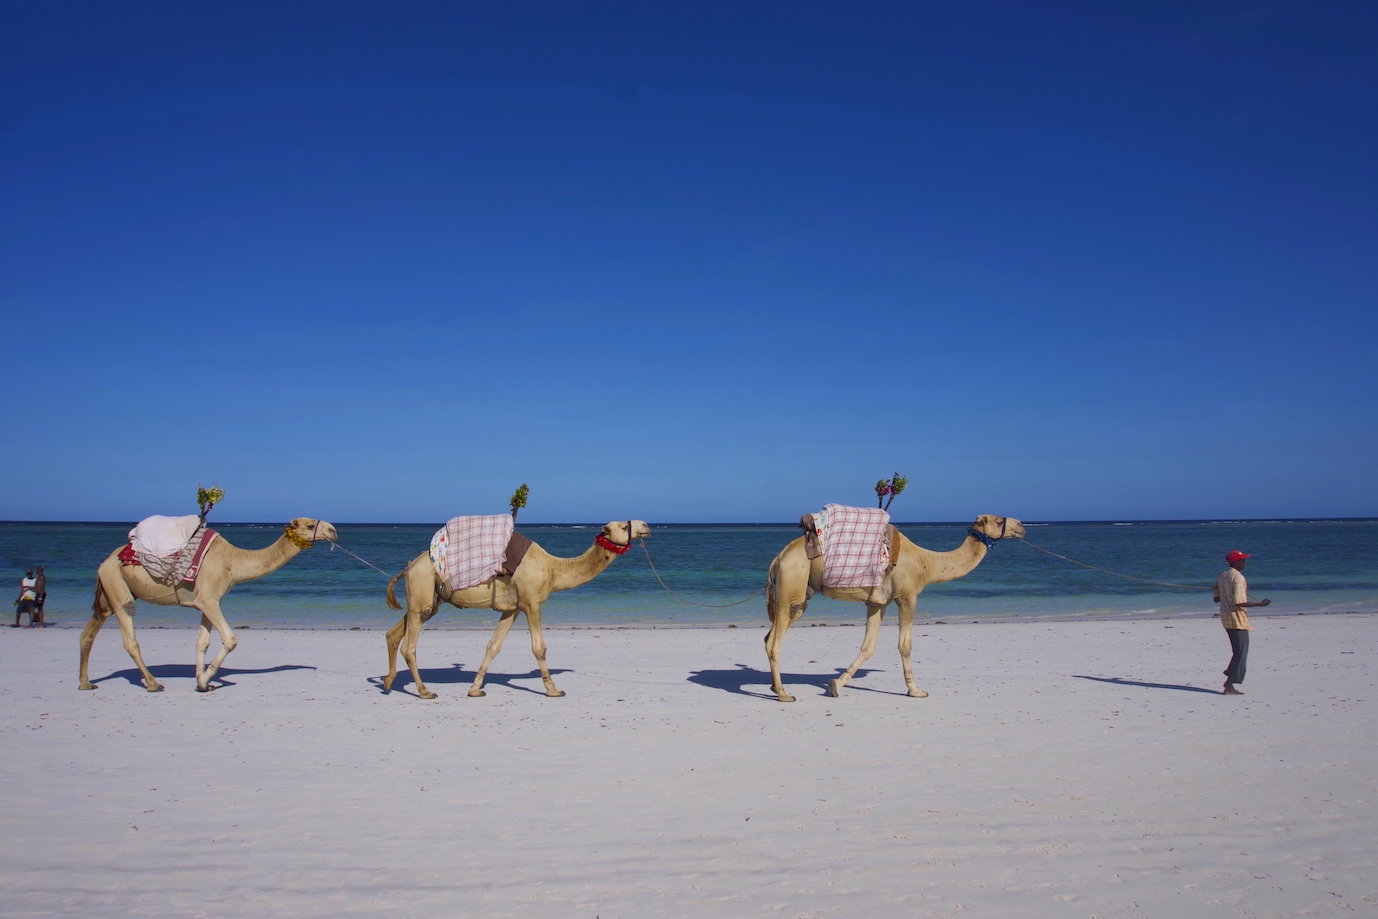 Three camels walking at the beach in Diani. You can see the blue sea on the background on a sunny day